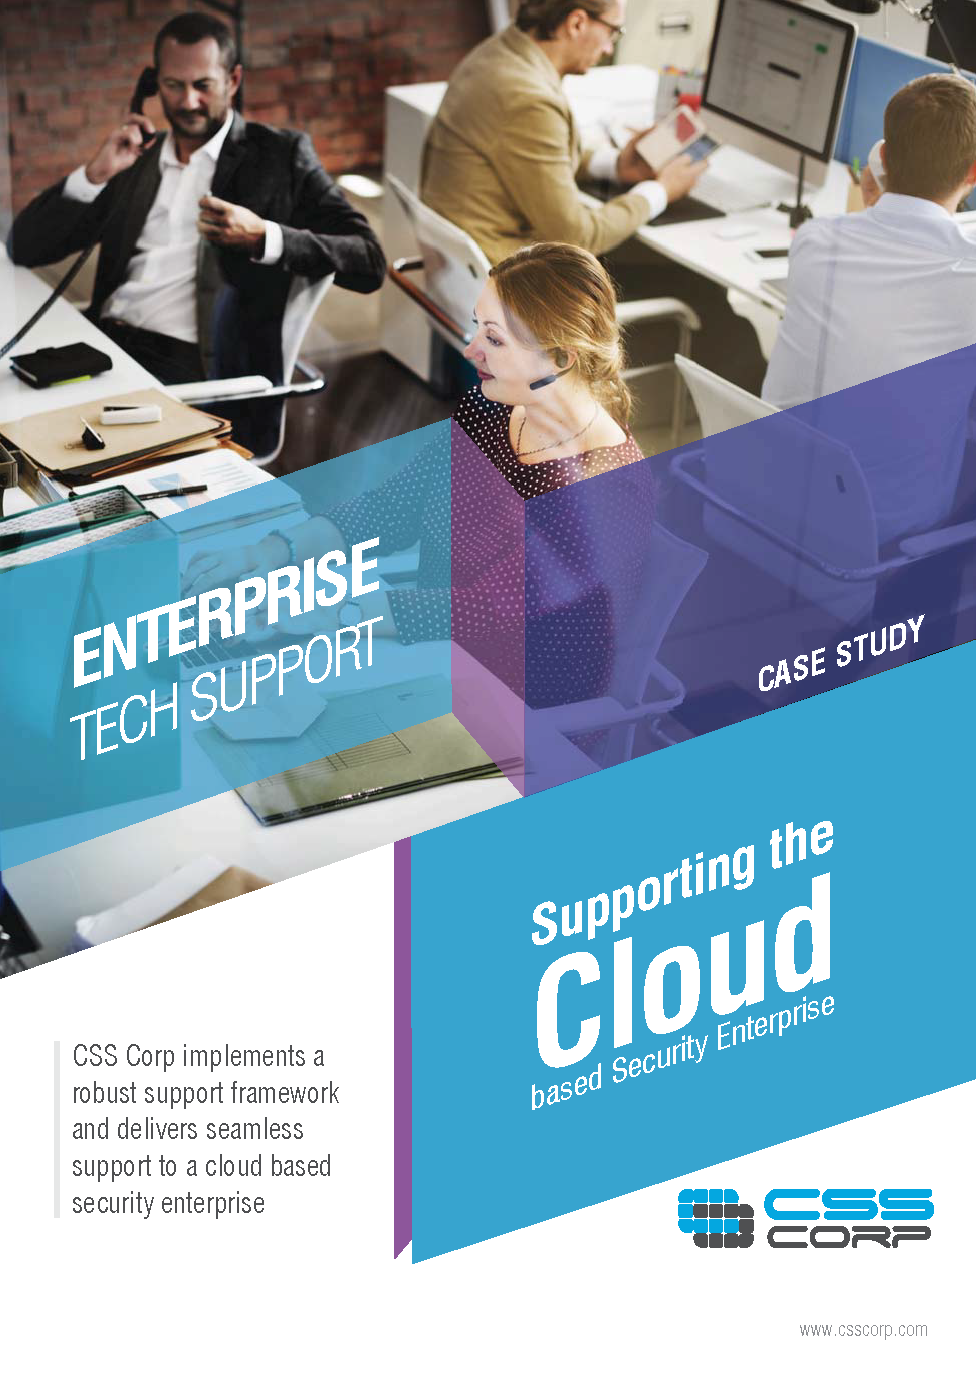 Supporting the cloud based security enterprise